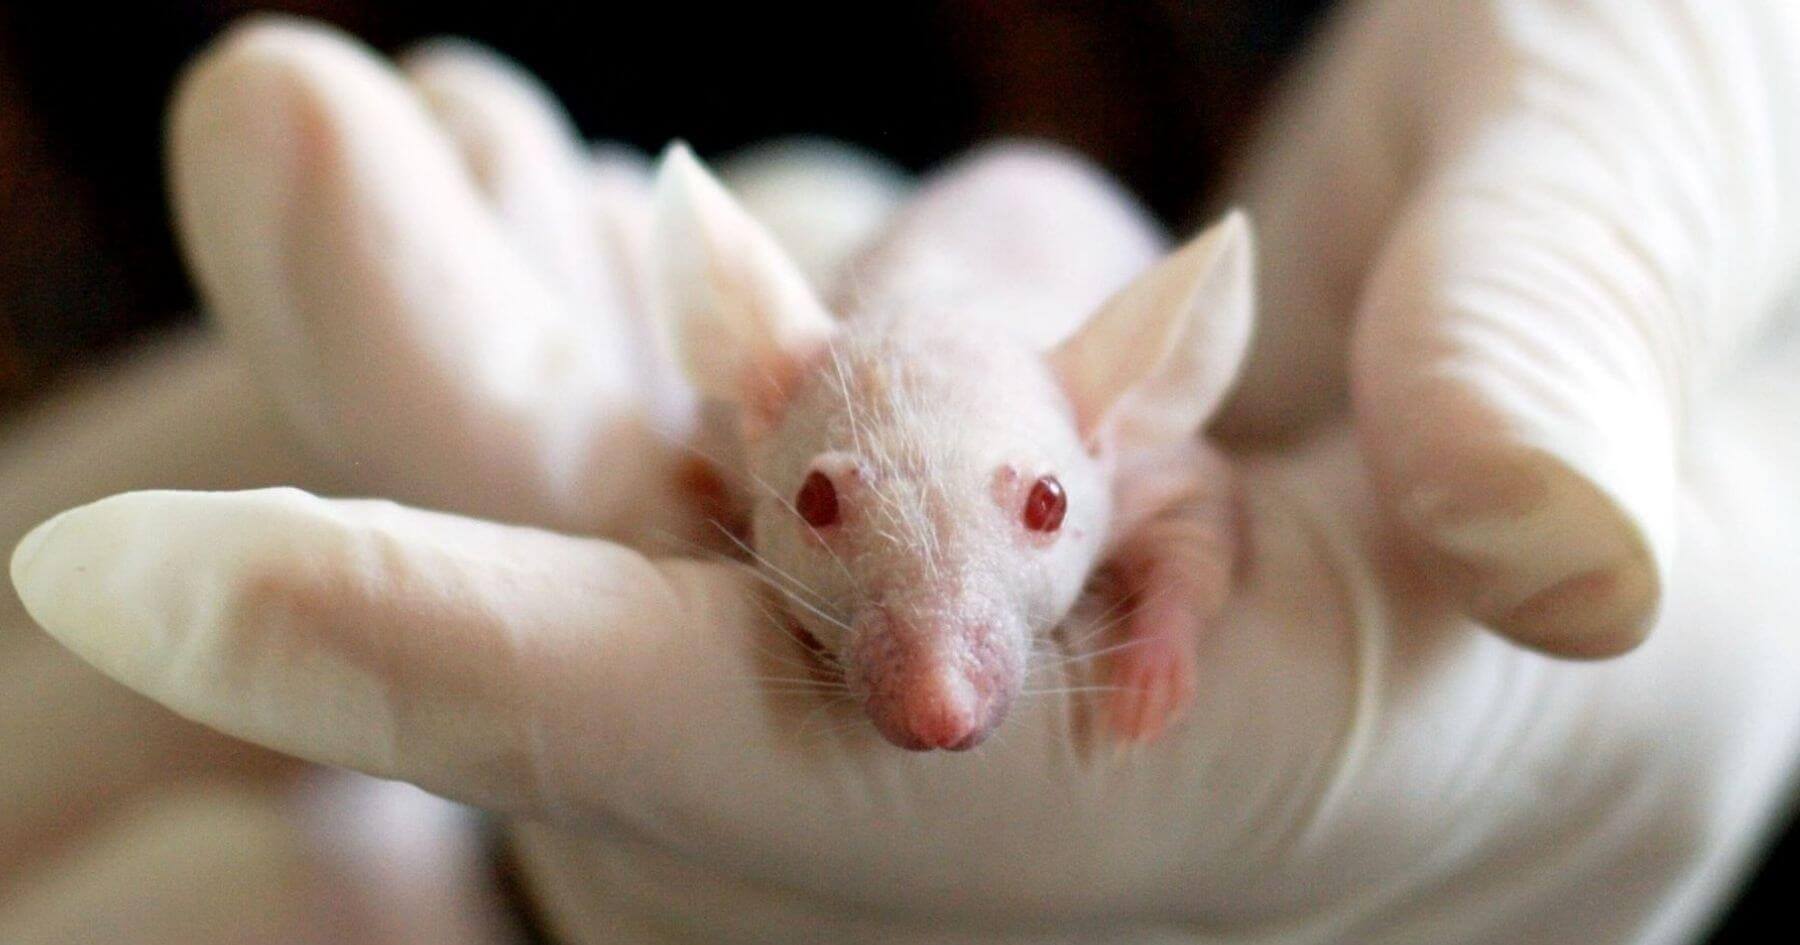 Newly created artificial wombs in mice raise concerns among abortion supporters